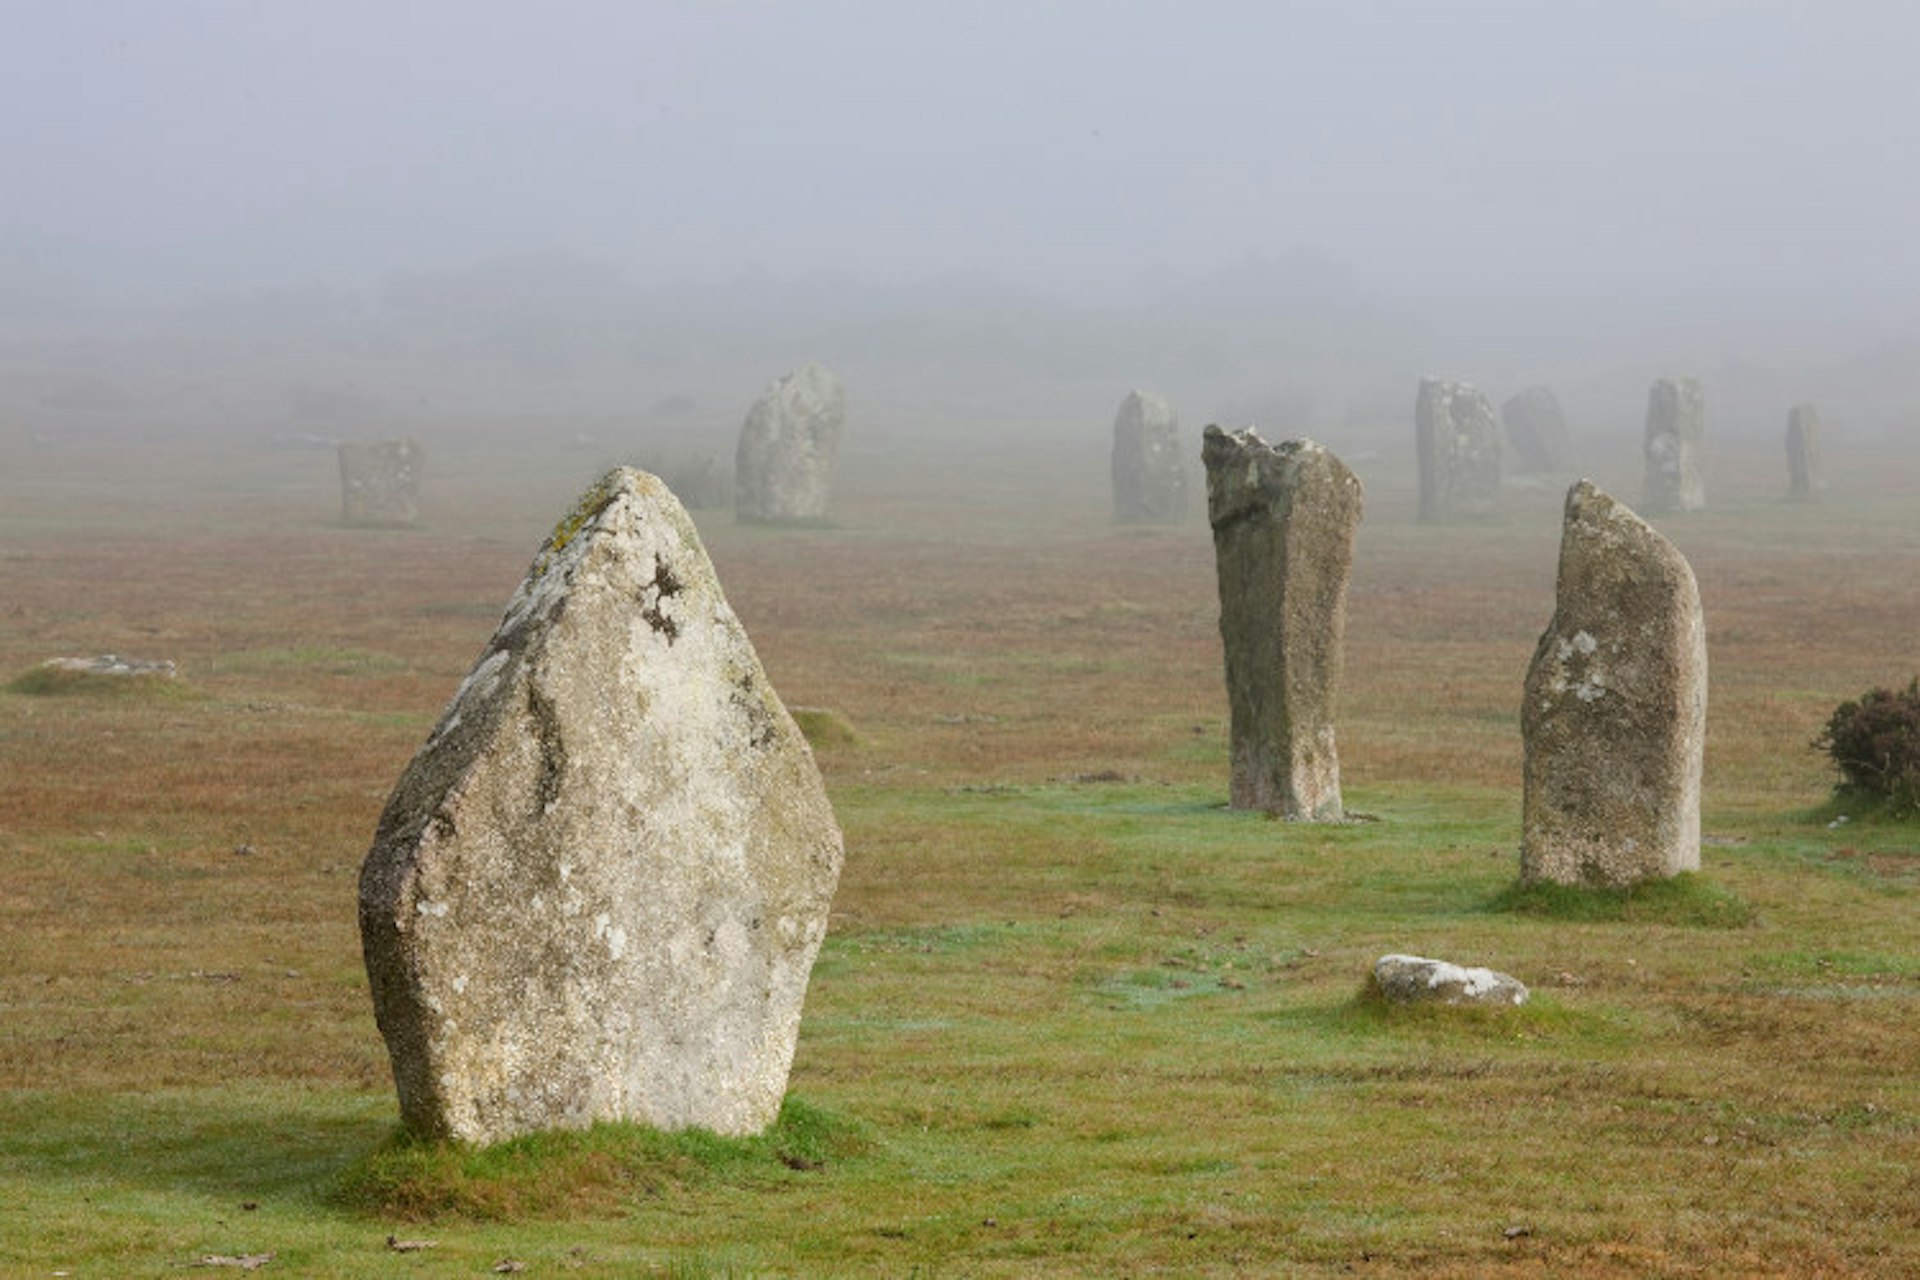 Hurlers Stone Circle, Bodmin Moor. Image by Laurie Noble / The Image Bank / Getty